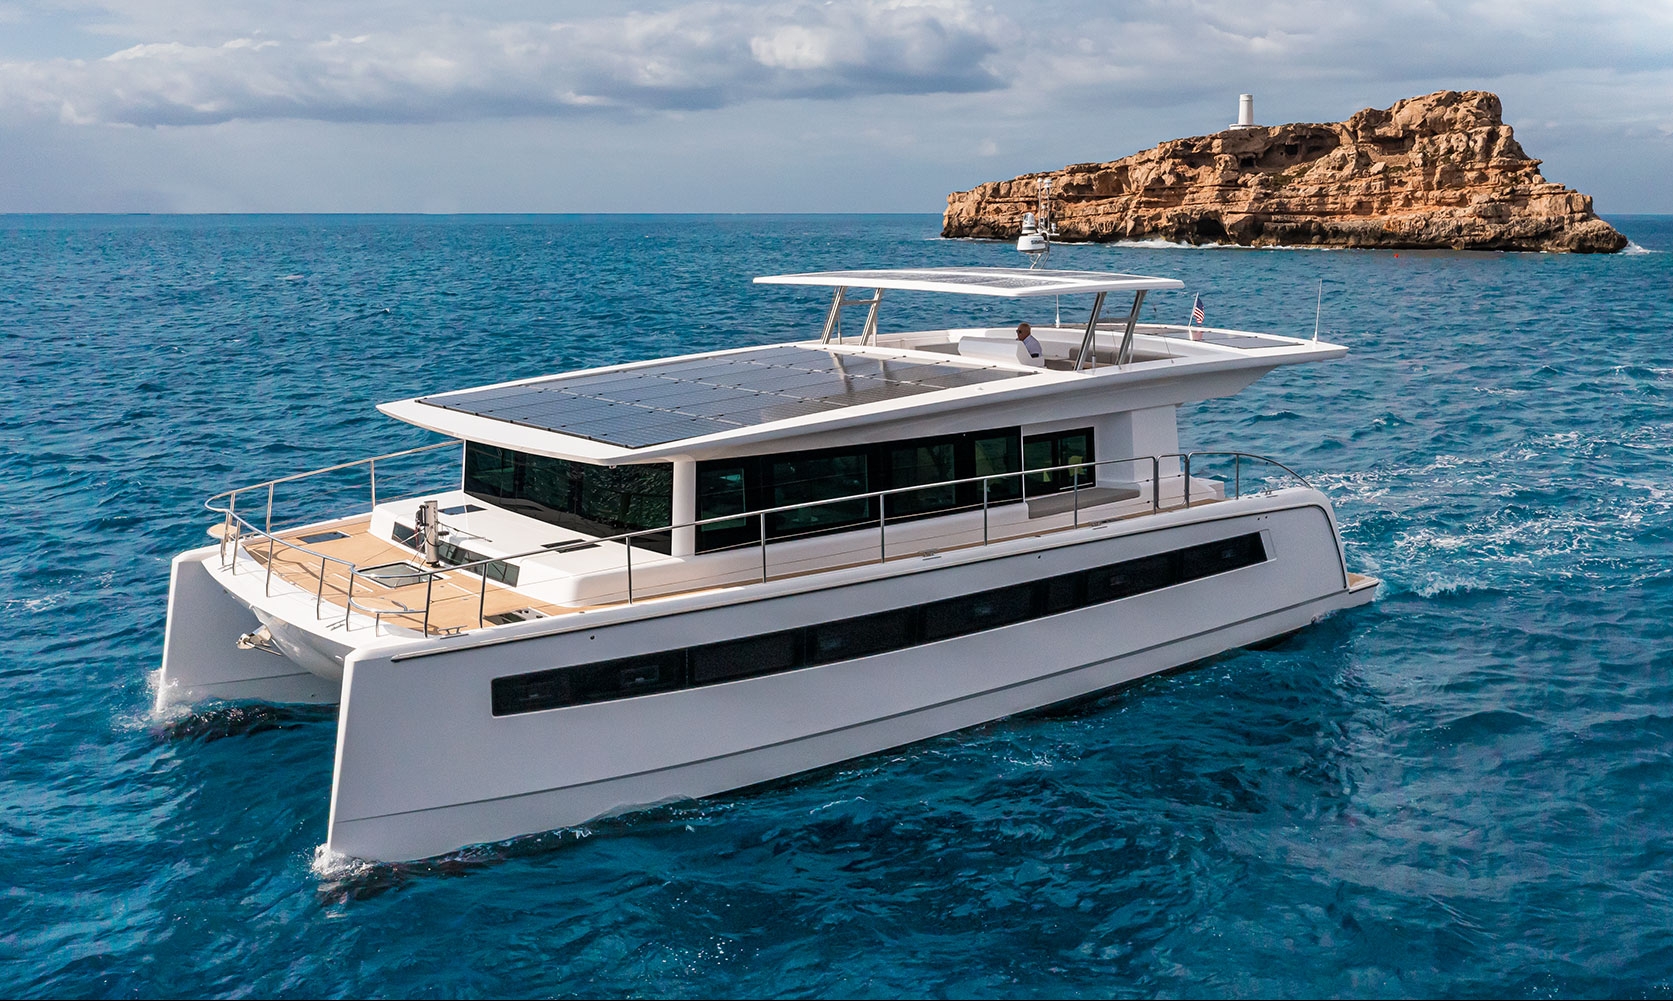 self-sufficient yacht with solar panels on the roof